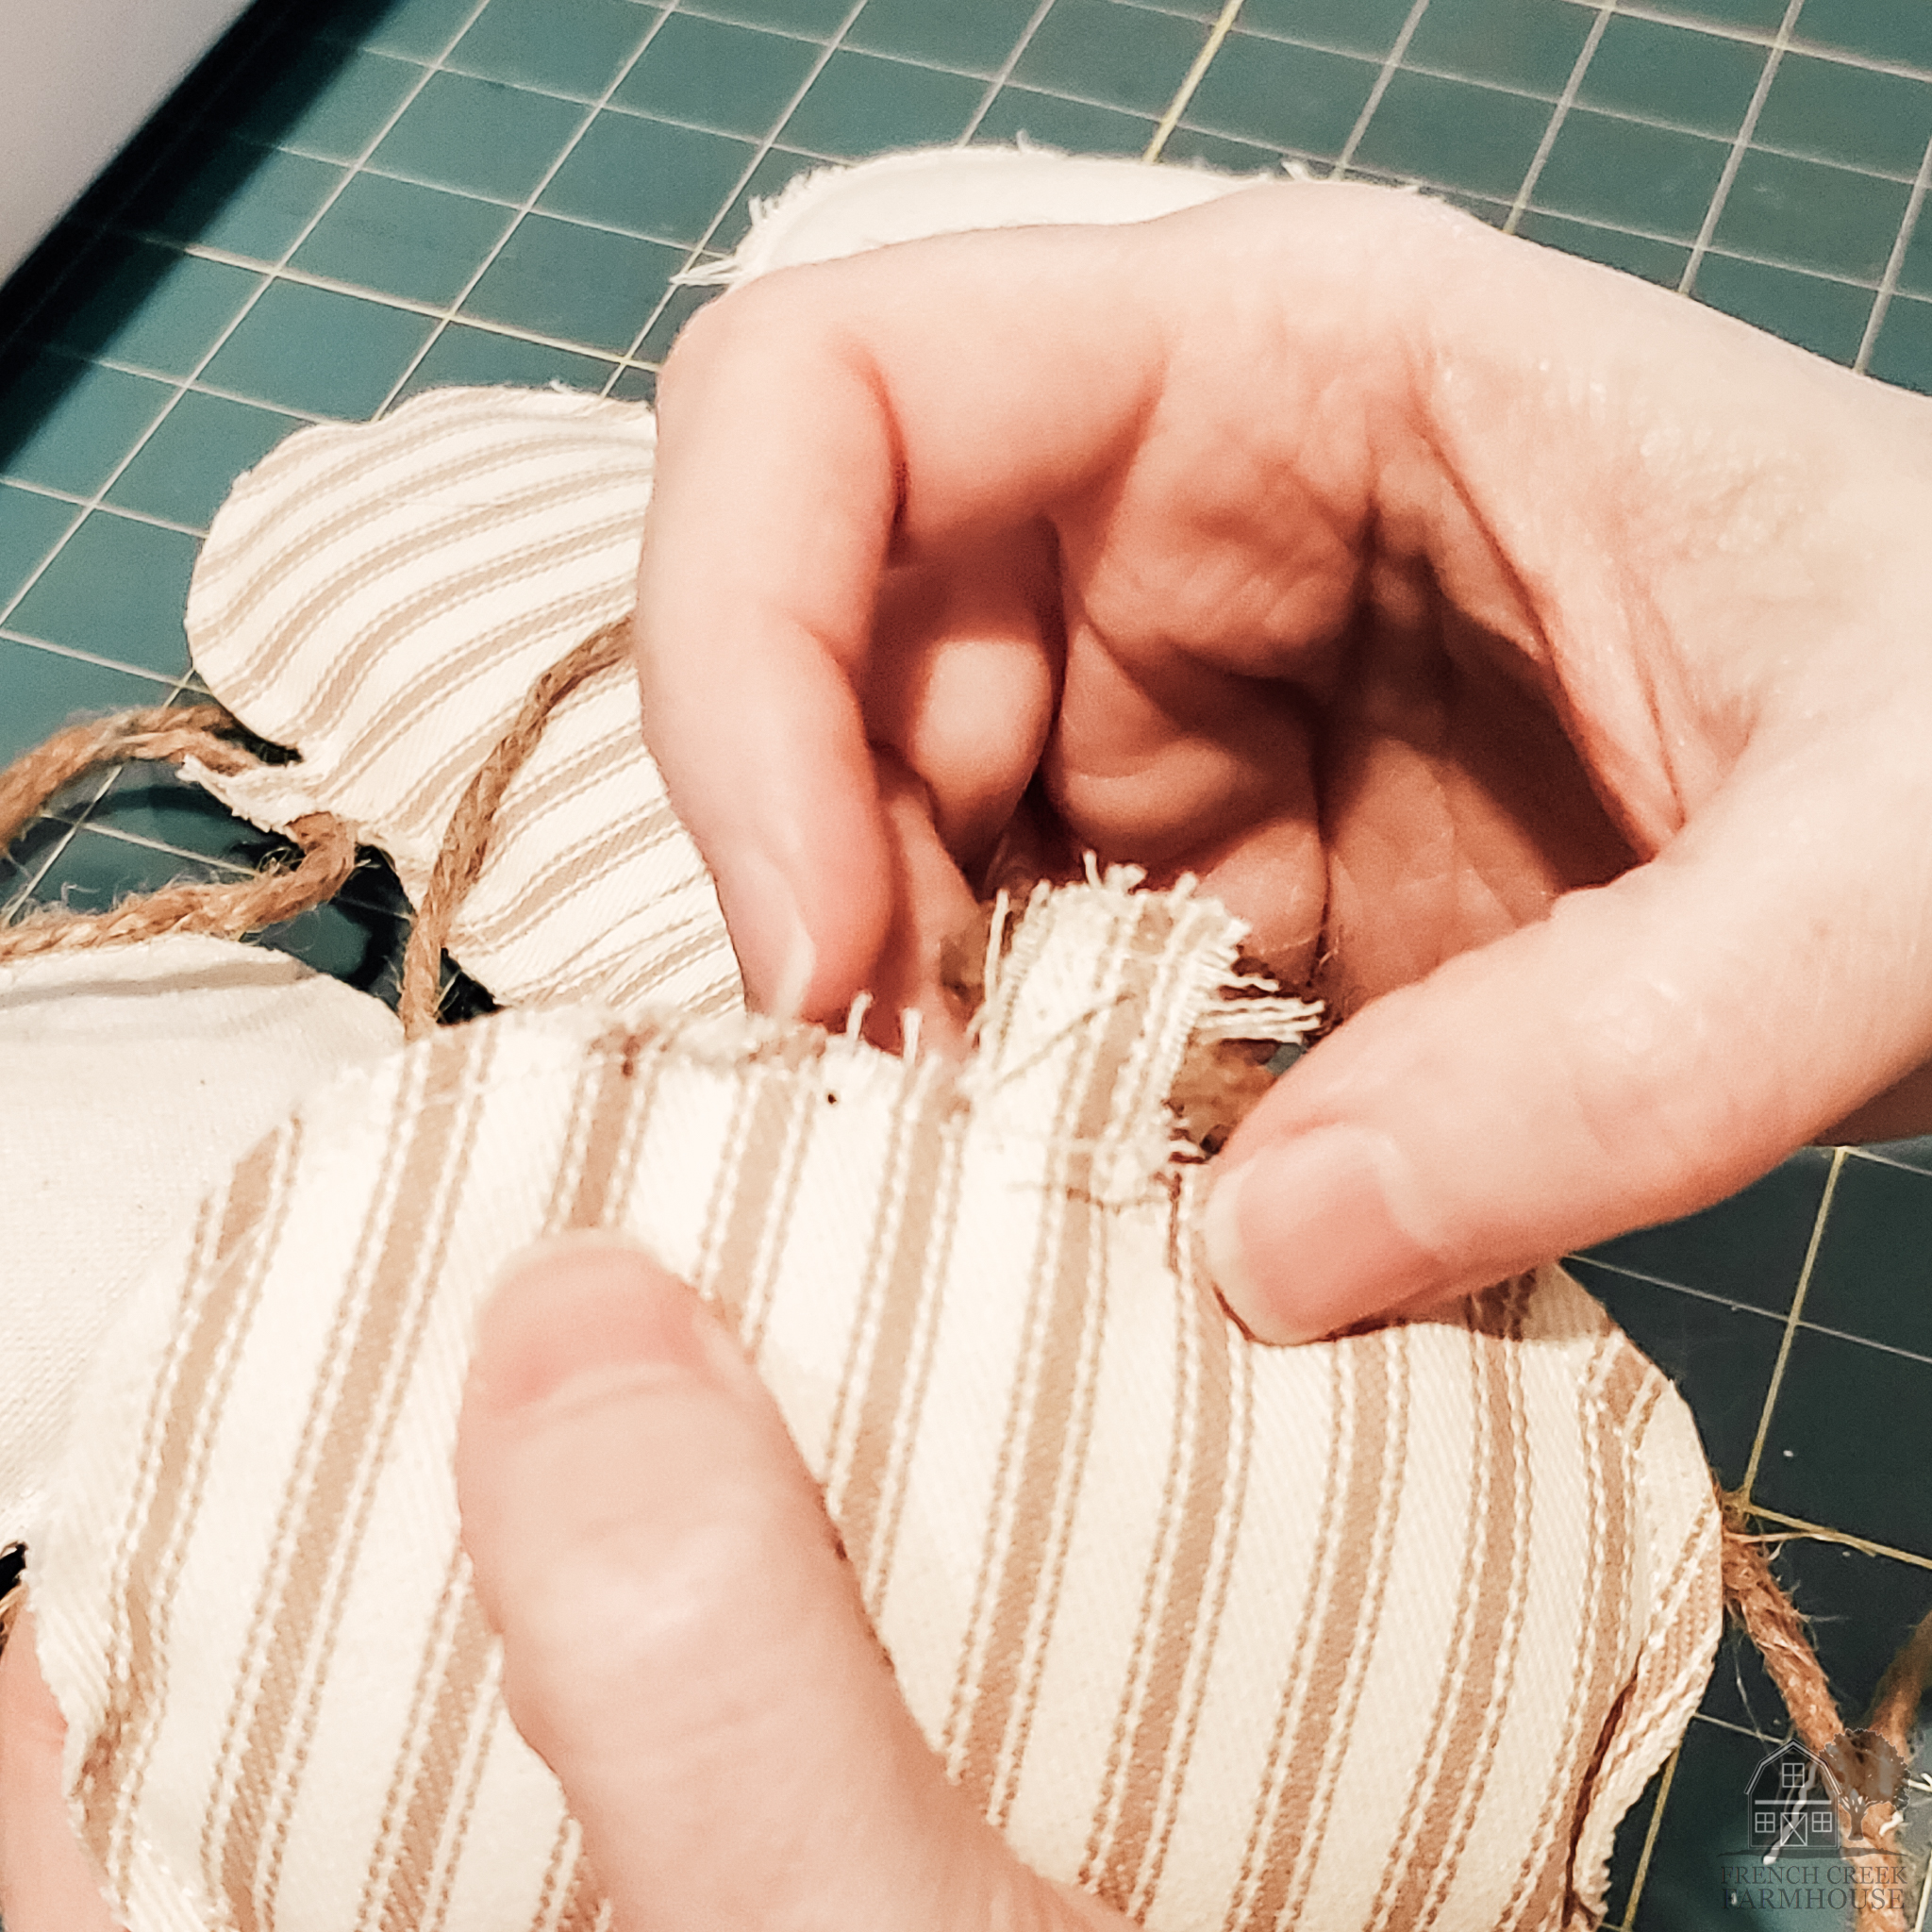 Fraying the edges of fabric